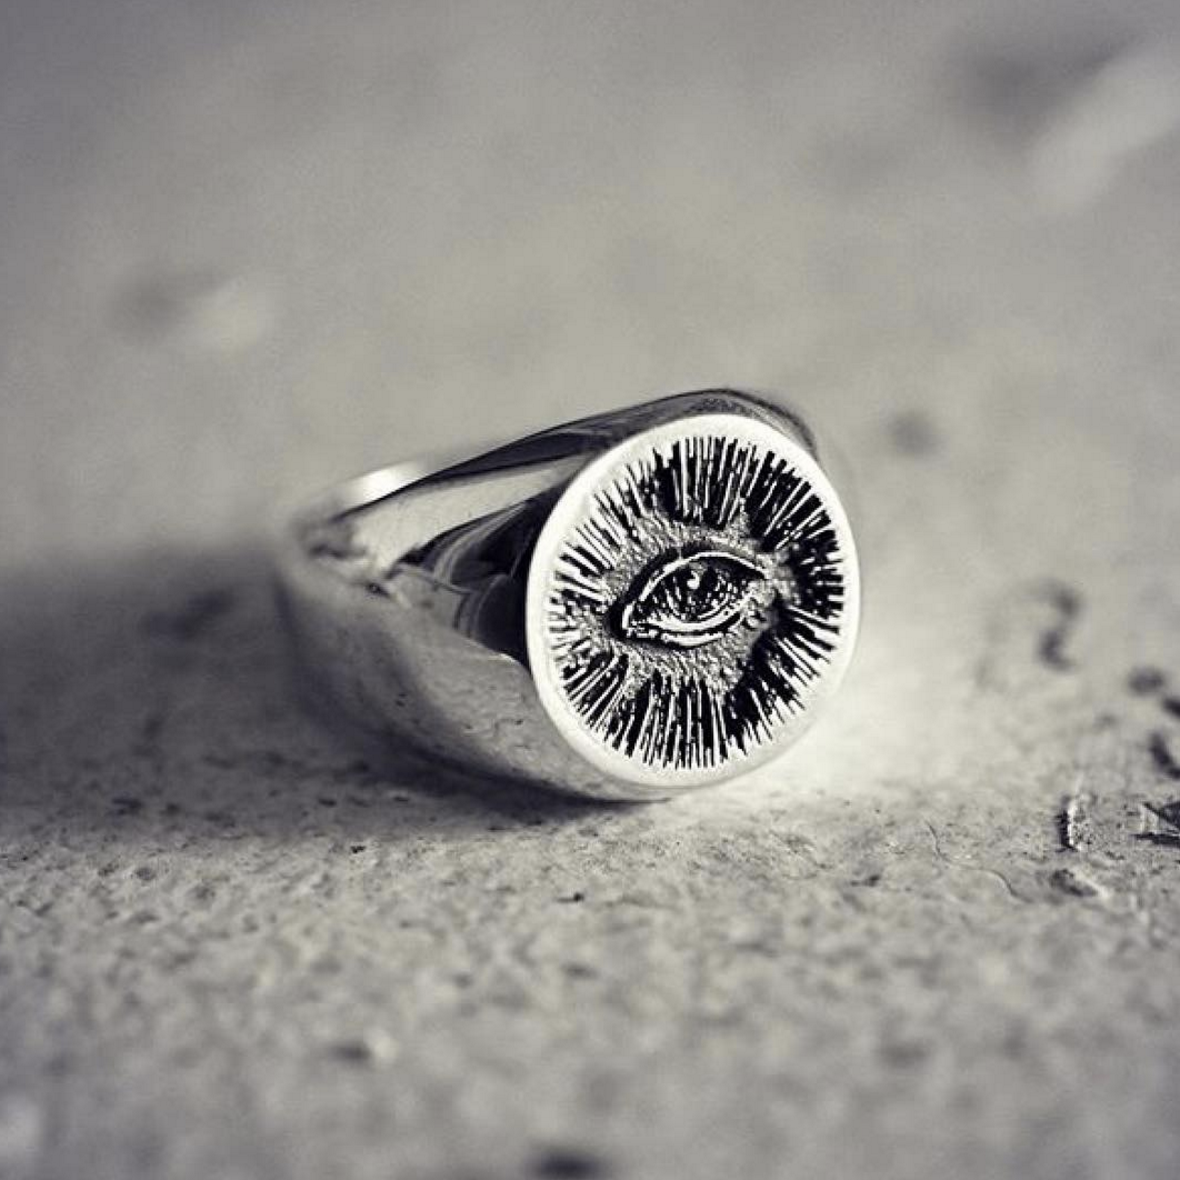 THE HUNT NYC - Small Signet Ring — THE HUNT NYC